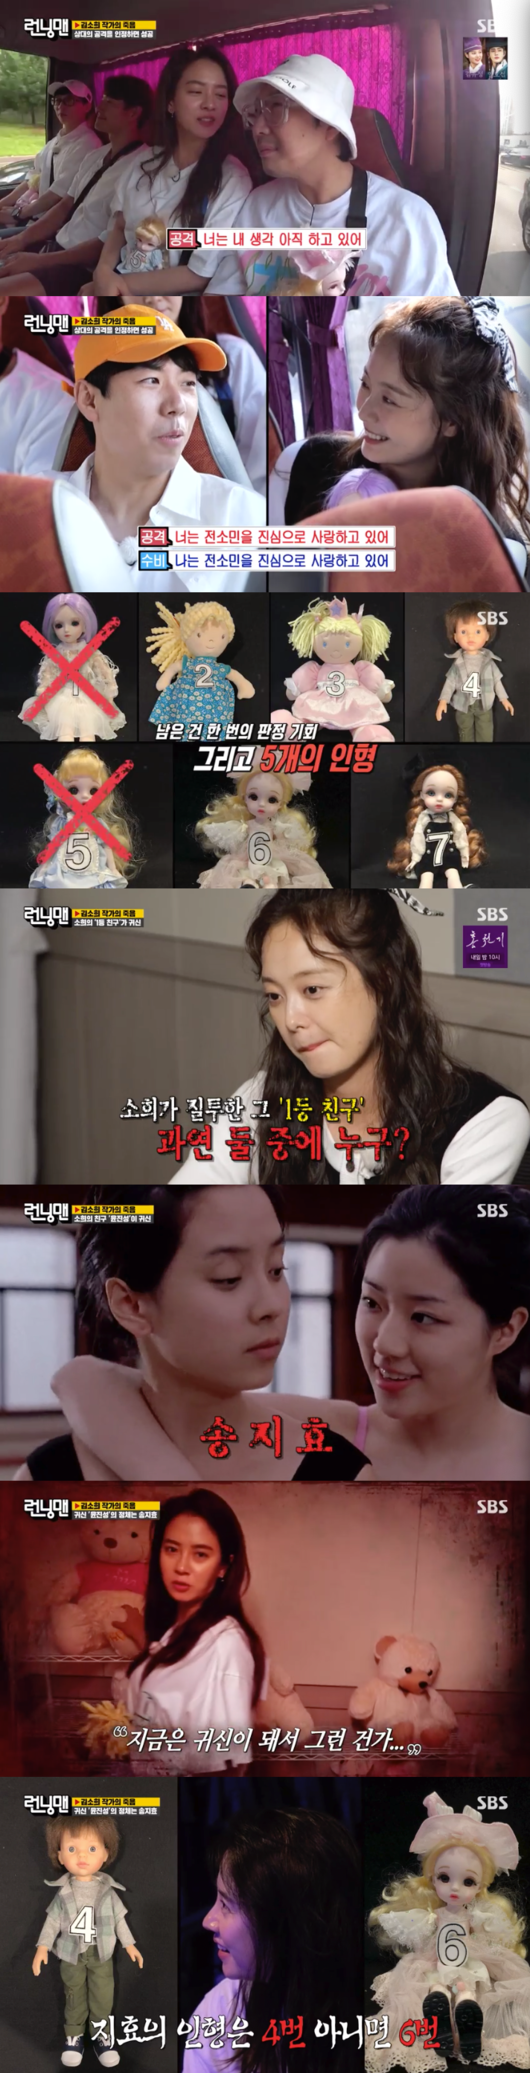 The main character of Running Man Voodoo Doll was Song Ji-hyo.On the afternoon of the 29th, SBS Running Man, Yoo Jae-Suk, Ji Suk-jin, Haha, Song Ji-hyo, Kim Jong-kook, Yang Se-chan and Jeon So-min went to the VIP Doll exhibition of Kim So Hee.Each of them picked up a Doll, and Kim So Hee, who explained it, suddenly died.In the will, Even if Kim So Hee dies, the highest price of Doll will be left to those selected according to the procedure.By 8 p.m., the best will inherit the person who won the Doll. If you finish first or second in the pre-test, you will receive a hint. To get the best Doll and legacy, the members conducted the first pre-test: Draw a star-cabin logo to test snow and observation.After the test, Yoo Jae-Suk and Haha won the first and second places and got a hint.They then took the bus to Kim So Hees alma mater tour, where the crew said, Attack one of the people next to you with You are now ~.The attacked person should say the same, but if he is blocked or overwhelmed, he will score one point. Yang Se-chan attacked Ji Suk-jin as you do not love your family and Ji Suk-jin countered to Yoo Jae-Suk, You regret marriage.Yoo Jae-Suk then asked Kim Jong-kook, who was on the other side, You are thinking of grace.But Kim Jong-kook was very embarrassed and shouted, Stop! Still, Ji Suk-jin said, Give me a favor.Running Man is waiting for you. I want to see you, I want to see you. He posted a video letter and angered Kim Jong-kook.Hahas target was Song Ji-hyo.He attacked Kim Jong-kook, and Song Ji-hyo acknowledged that Yoo Jae-Suk was expecting.Haha said, You were at Kim Jong-kooks house yesterday, but rather it was knocked down to Song Ji-hyo, who said, You thought about me yesterday.Jeon So-min was rather dignified.He told Yang Se-chan, You really love Jeon So-min, and Yang Se-chan replied, I really love Jeon So-min.Then, rather, he attacked Ji Suk-jin, saying, You really love Jeon So-min.The first, second and third places in the game were Yang Se-chan, Song Ji-hyo and Yoo Jae-Suk.Among them, Yoo Jae-Suk found a video and turned it on. The best Doll is Voodoo Doll.The ghost who cursed Doll and killed the writer is mixed among you. It turned out that the members had their names in the Doll belly, and it was a rule to win if they came to their Doll or found Voodoo Doll.If you find hidden envelopes all over the school and submit two of the Doll photos, you can check them at the Doll Theater.In fact, Kim So Hee was second in the world since his school days, and after killing his first friend, he swept the gold medal in various competitions.So Doll was cursed and suddenly died because of the ghostly welcome of the first place.As a result, Kim Jong-kook, No. 1, Yoo Jae-Suk, and No. 3 Ji Suk-jin were removed in turn.Among the remaining, the most likely first and ghosts were Jeon So-min or Song Ji-hyo.Haha, Yang Se-chan, and Jeon So-min mentioned the movie Girls Gospel 3 and the ghost was revealed as Song Ji-hyo.The remaining three humans split the number four Doll ship, named after Song Ji-hyo, after reasoning and took the victory.The defeated Song Ji-hyo left late for a handmade Doll with a penalty.running man